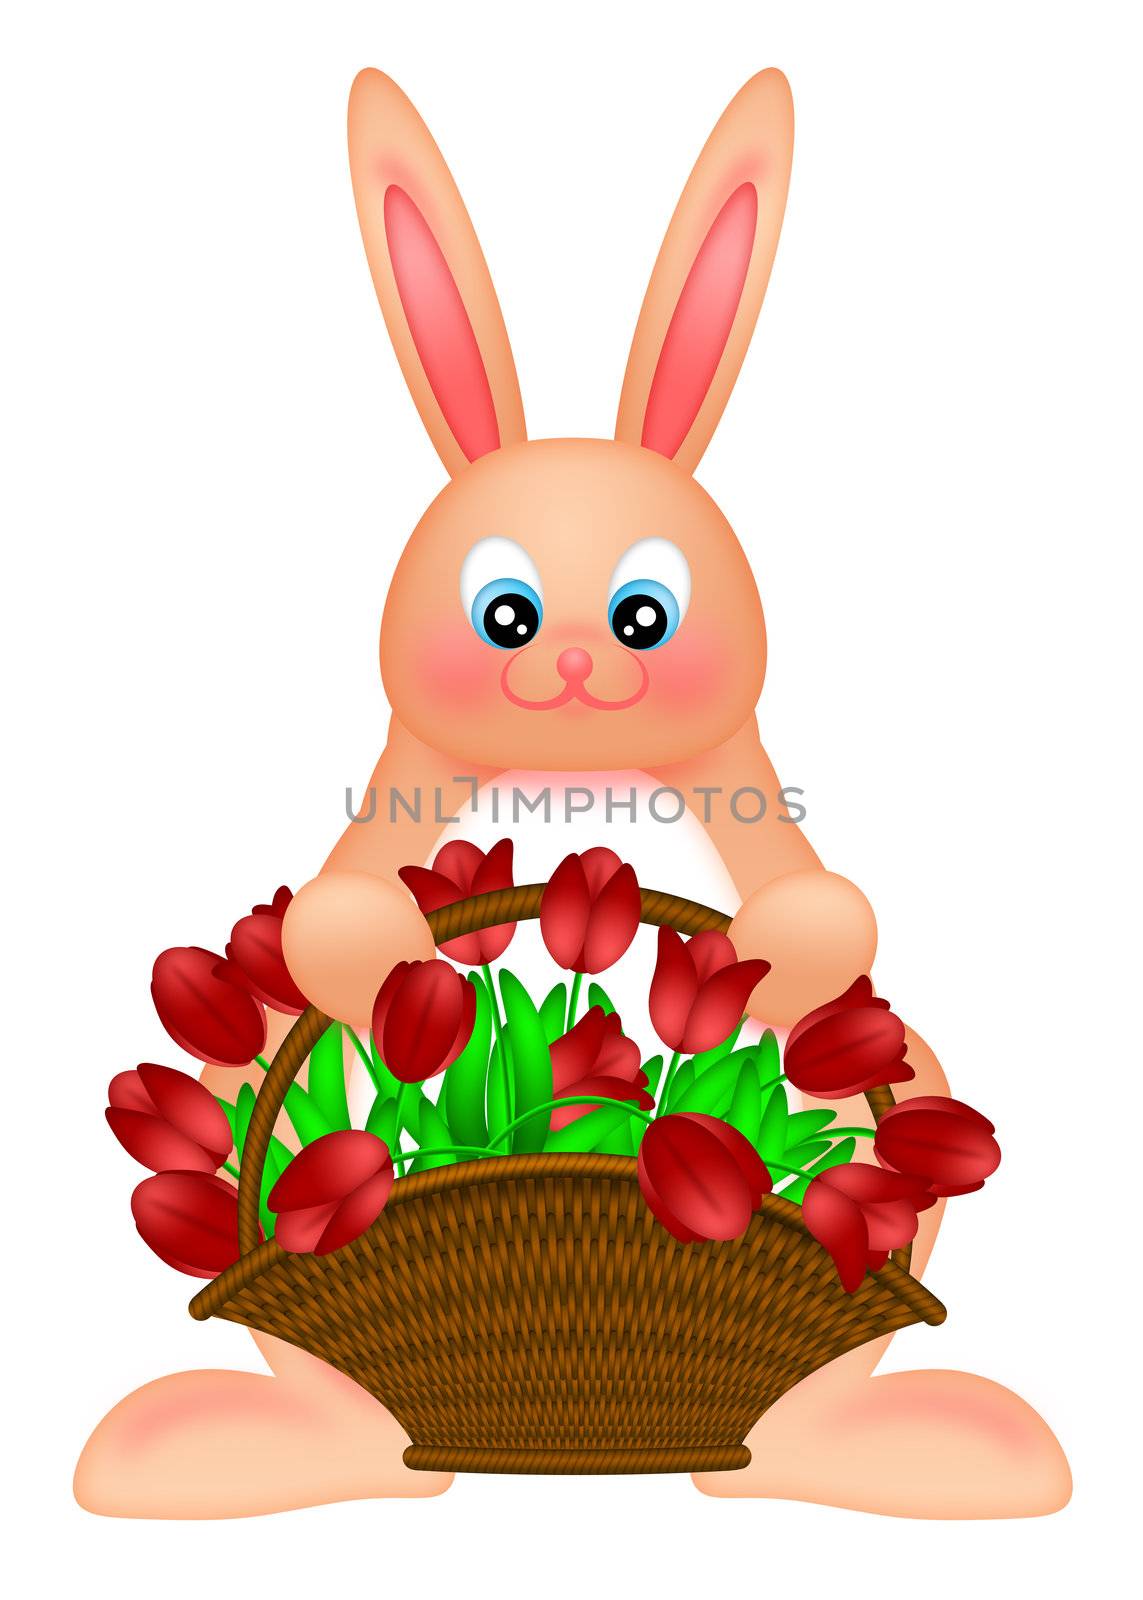 Happy Easter Bunny Rabbit  with Tulips Basket Illustration by jpldesigns